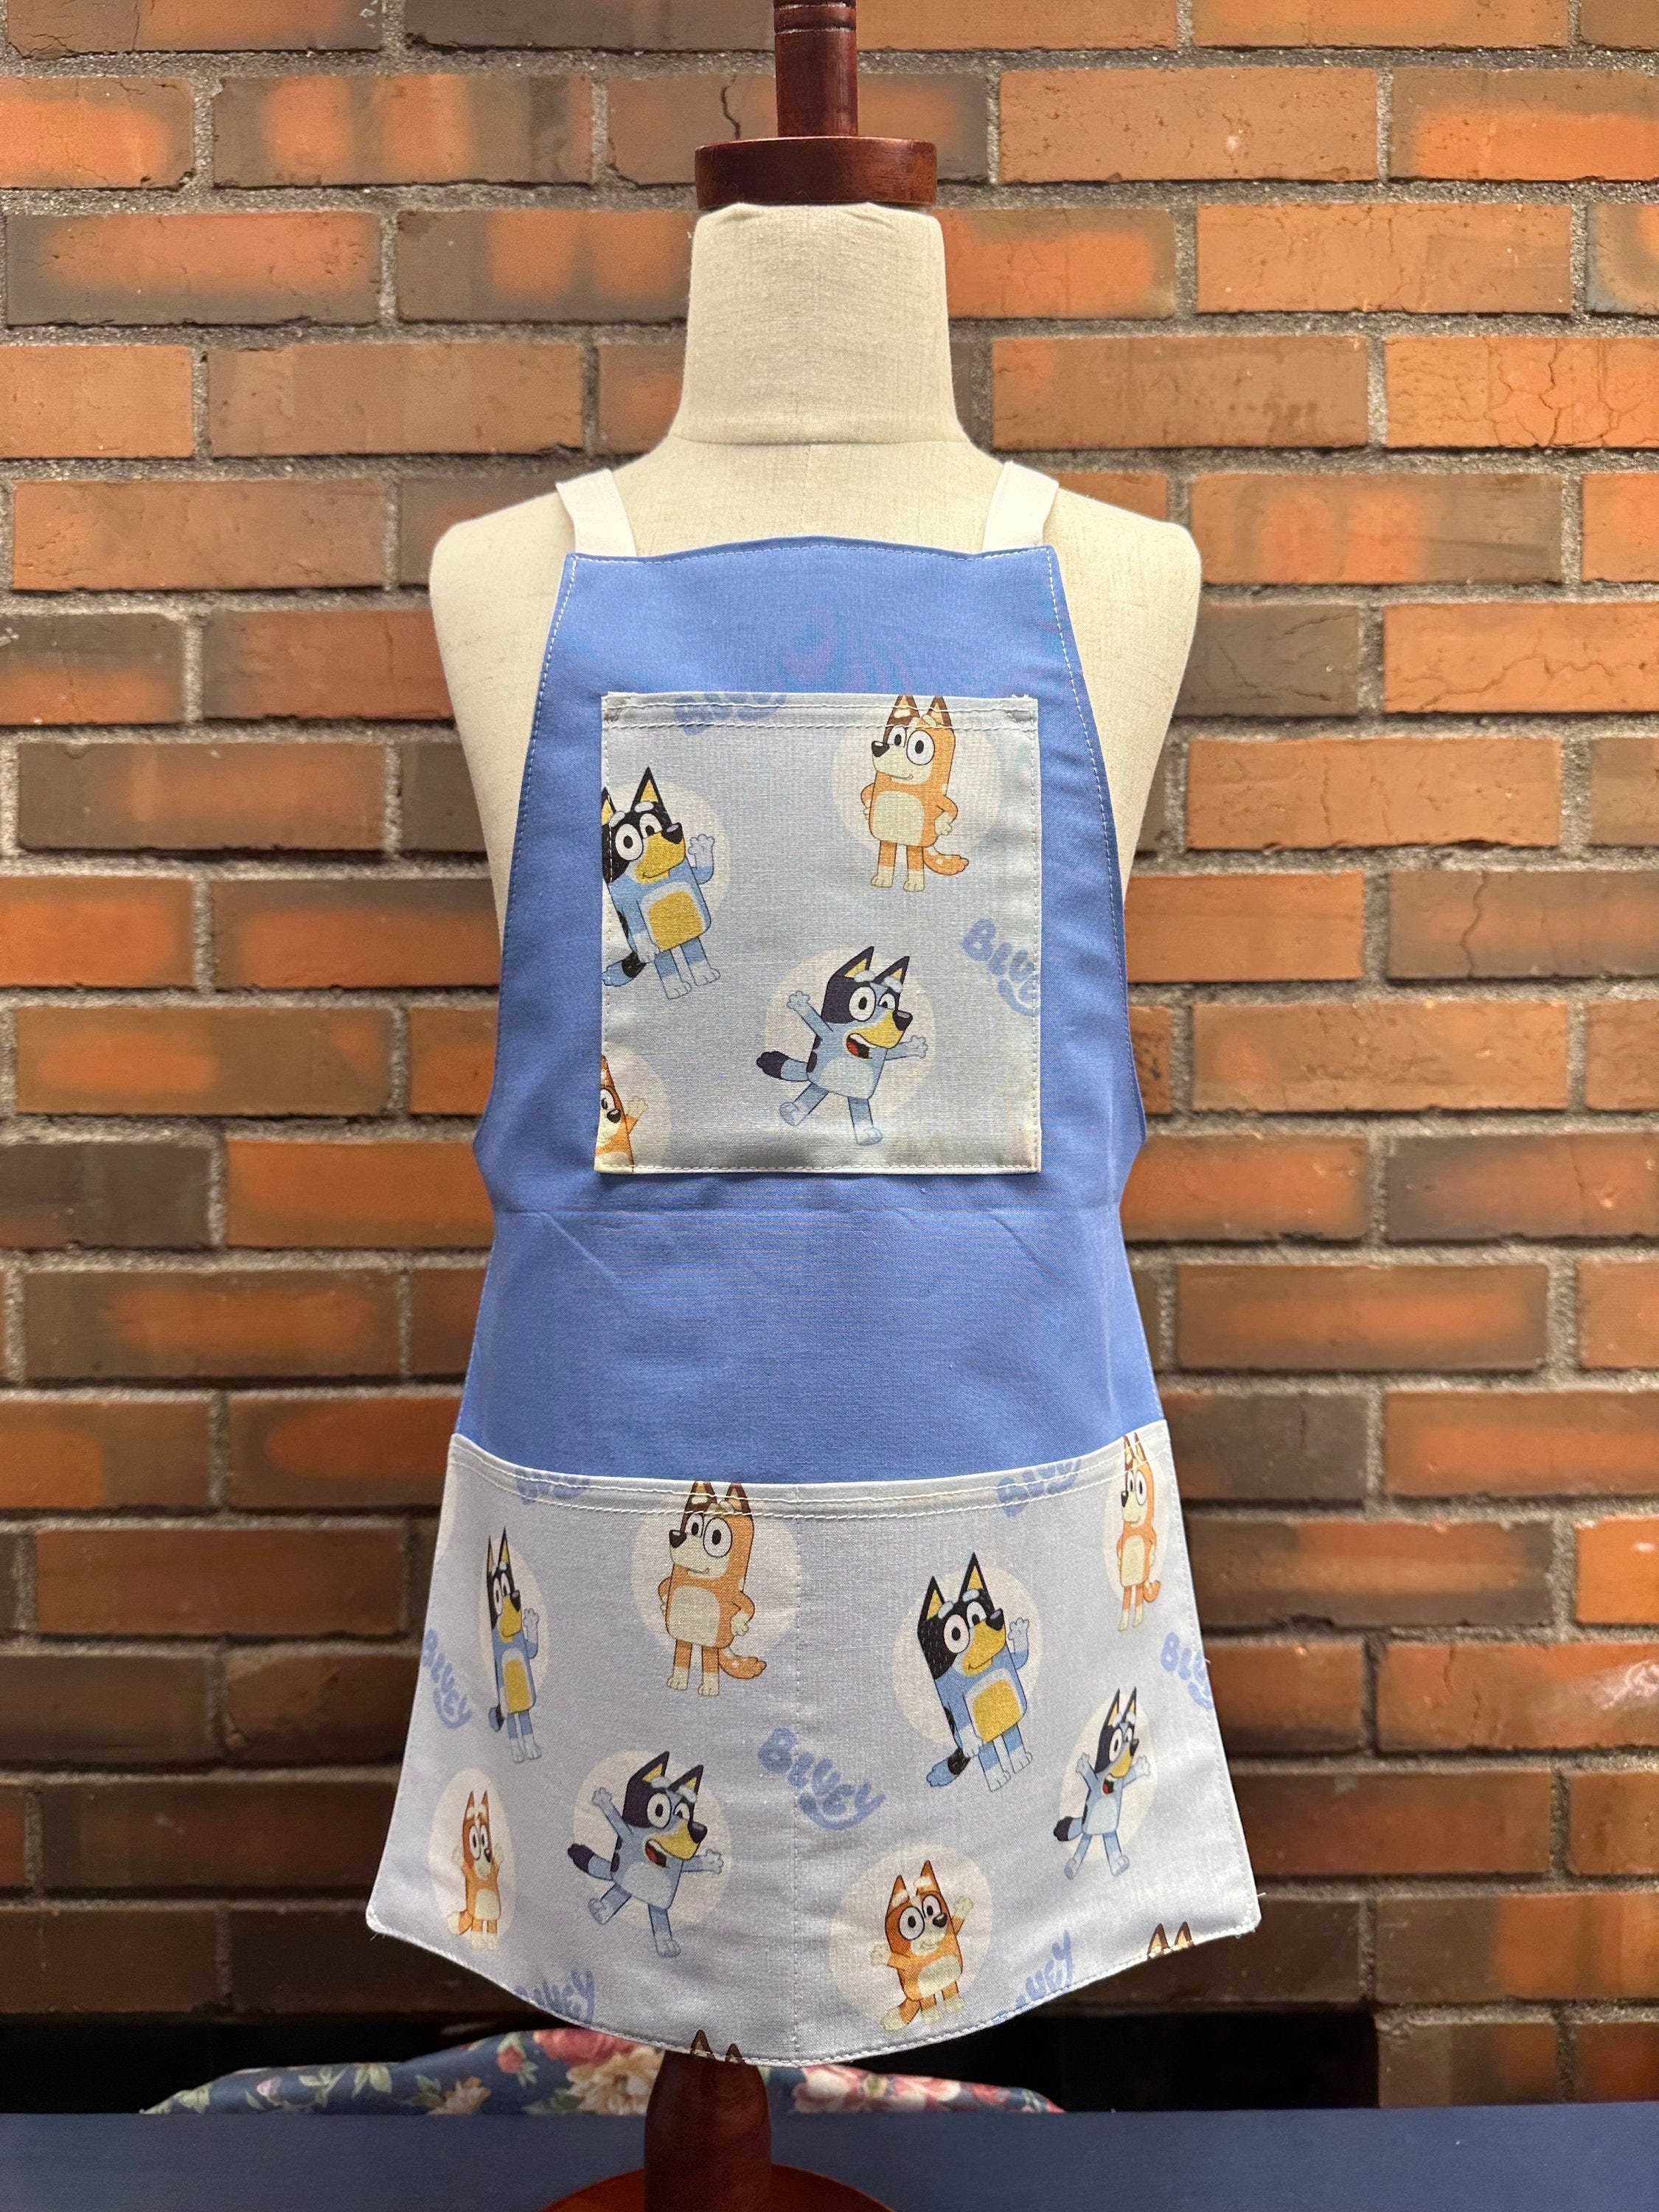 Bluey Unique Tie-less design Youth size small double sided great for painting crafts cooking Blue Dog kids